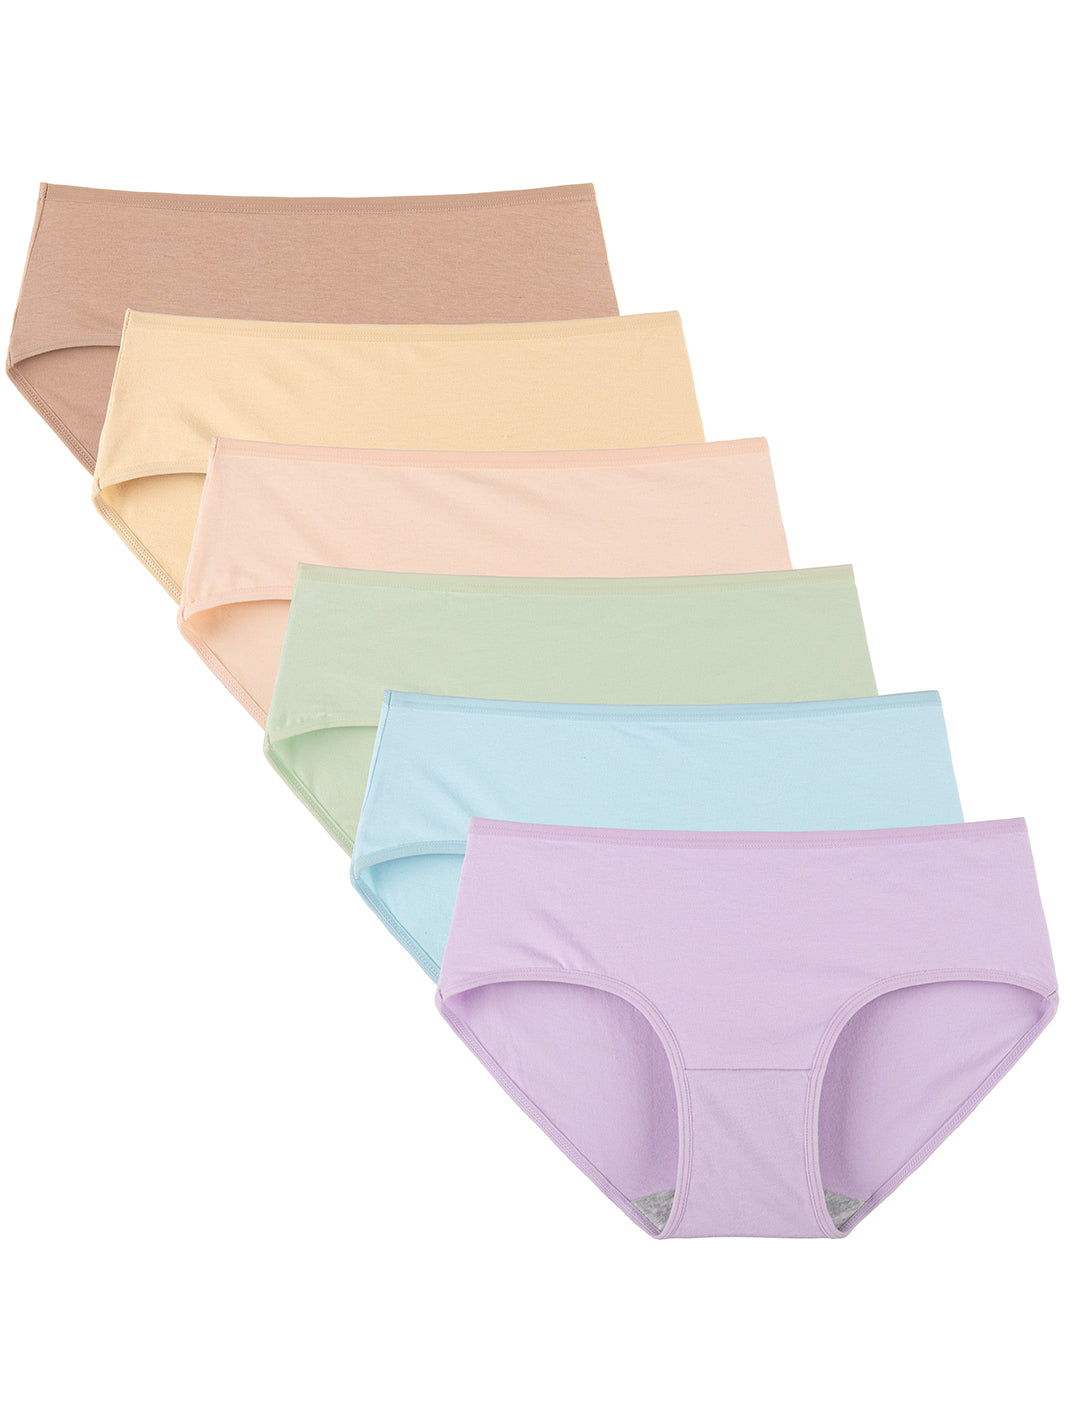  INNERSY Womens Underwear Cotton Hipster Panties Regular & Plus  Size 6-Pack